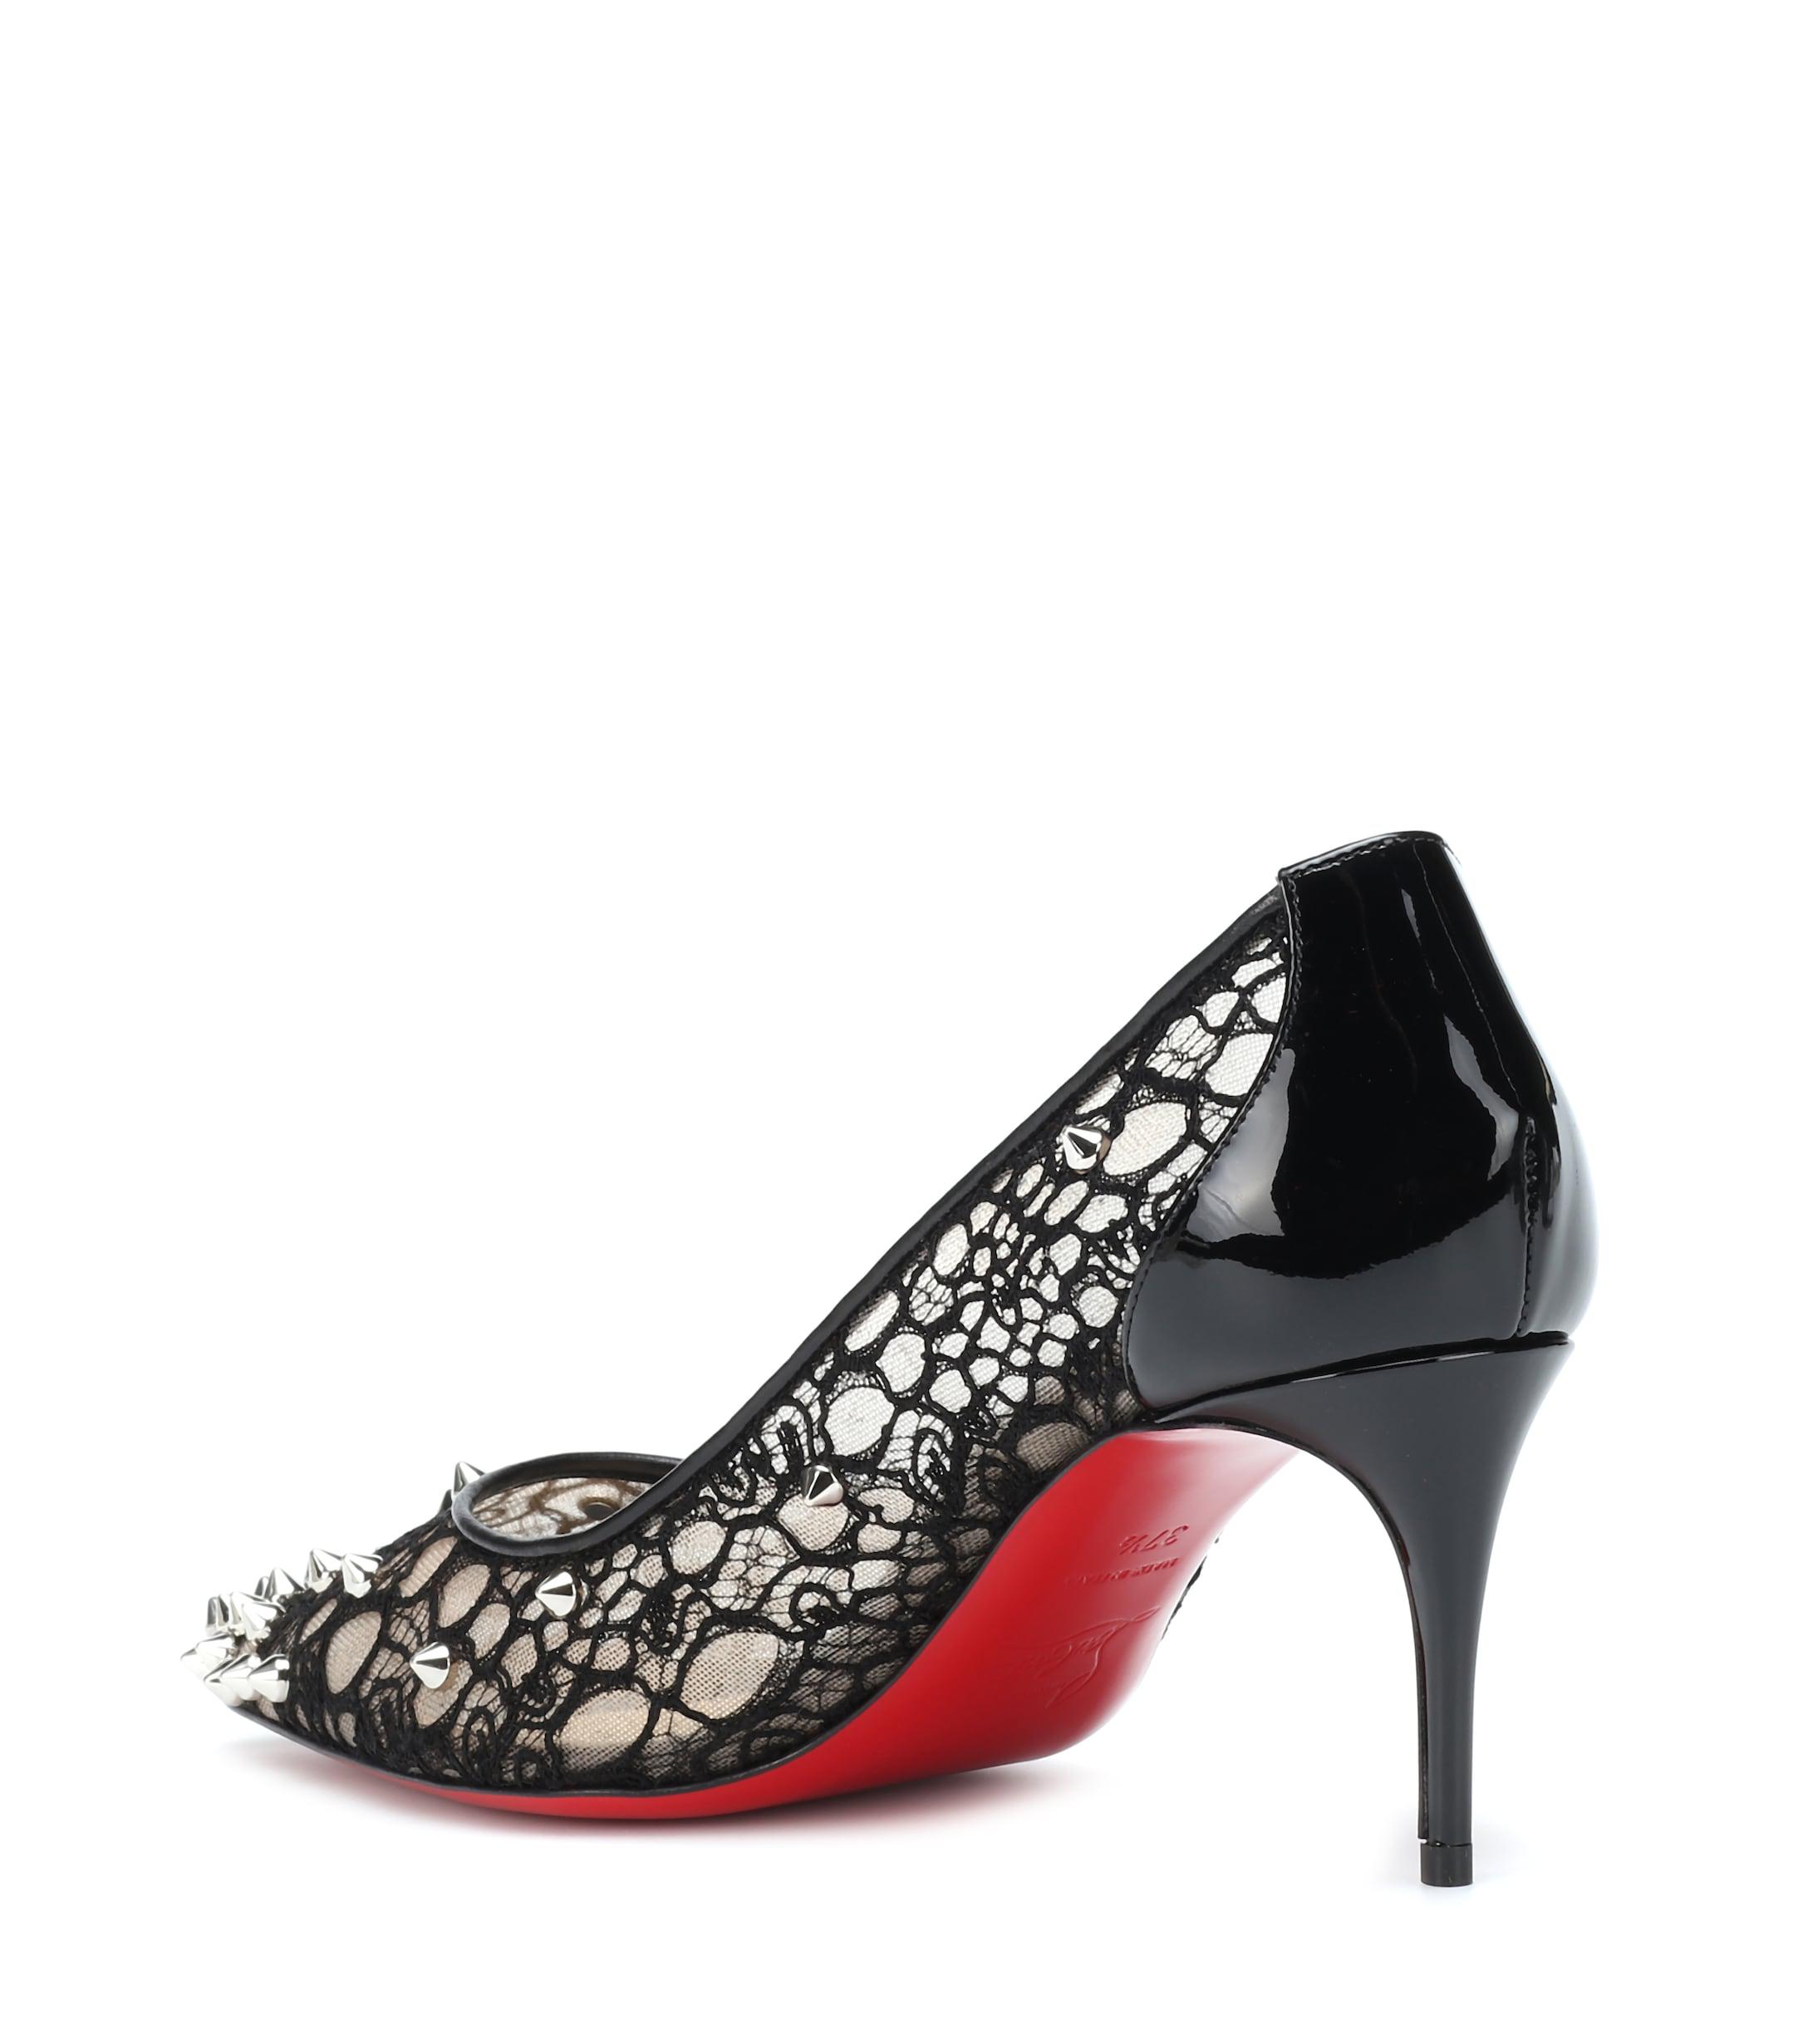 Christian Louboutin Lace 554 70 Spiked Pumps in Black,Silver (Black) - Lyst